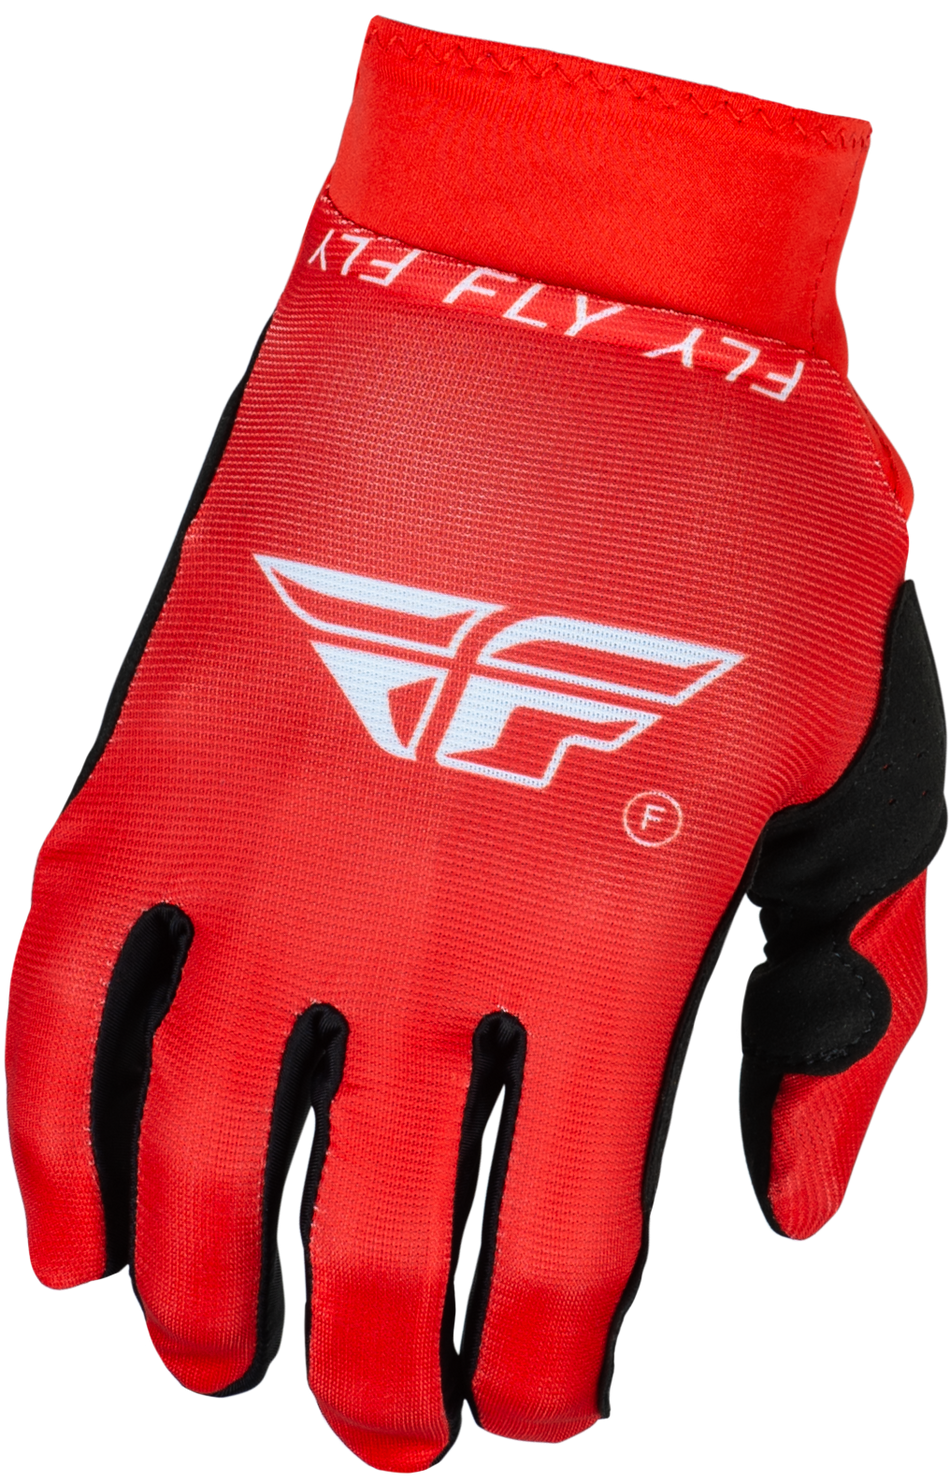 FLY RACING Pro Lite Gloves Red/White Xl 377-044X